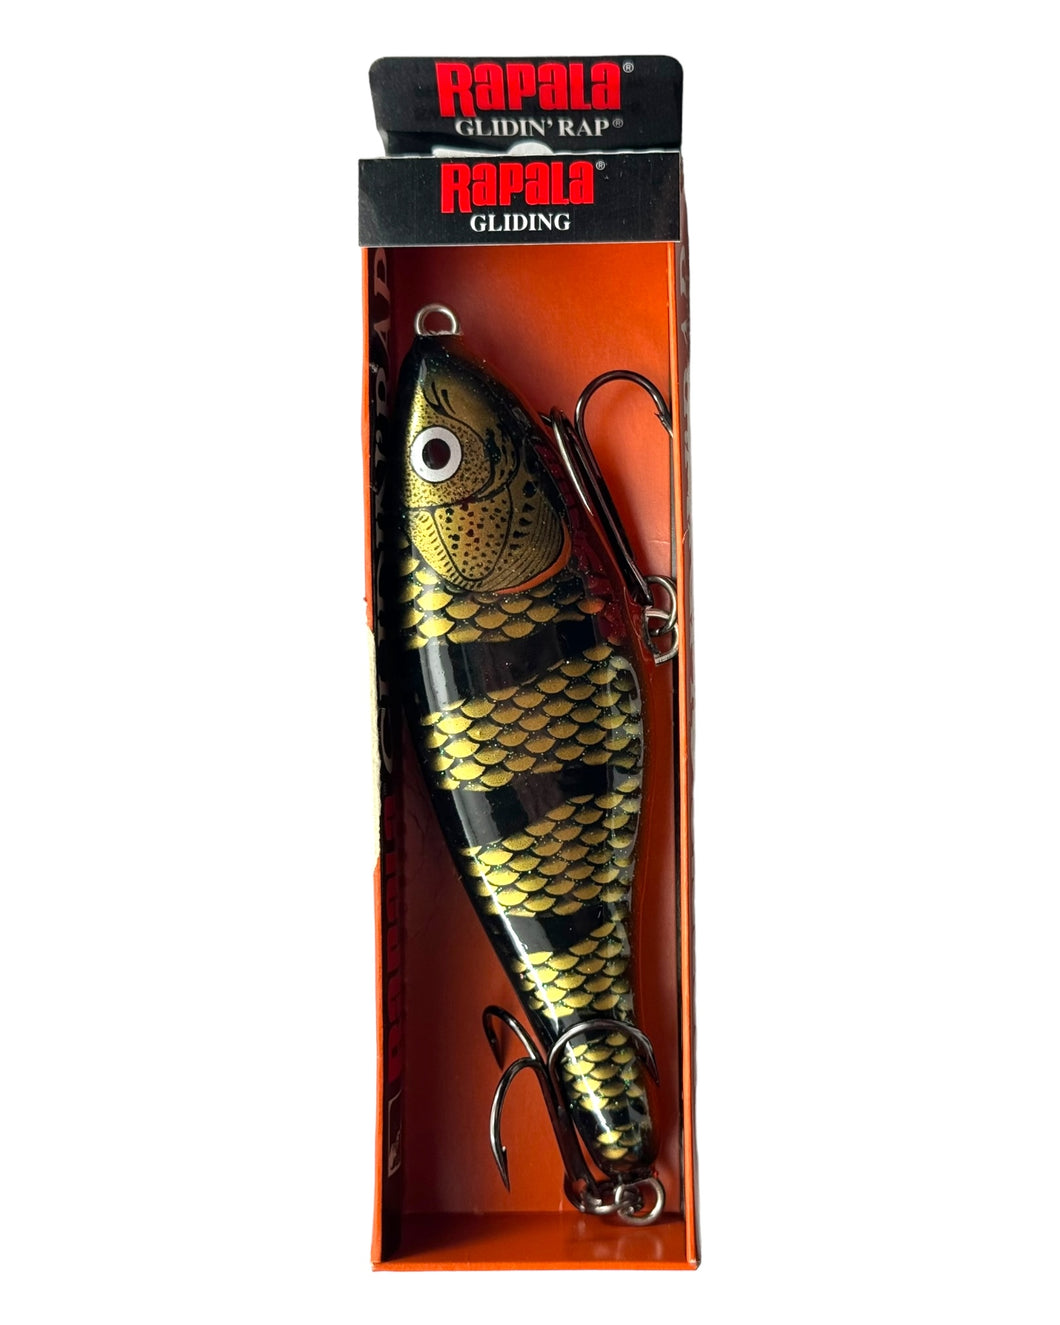 RAPALA SPECIAL GLIDIN' RAP 12 Fishing Lure in BANDED BLACK